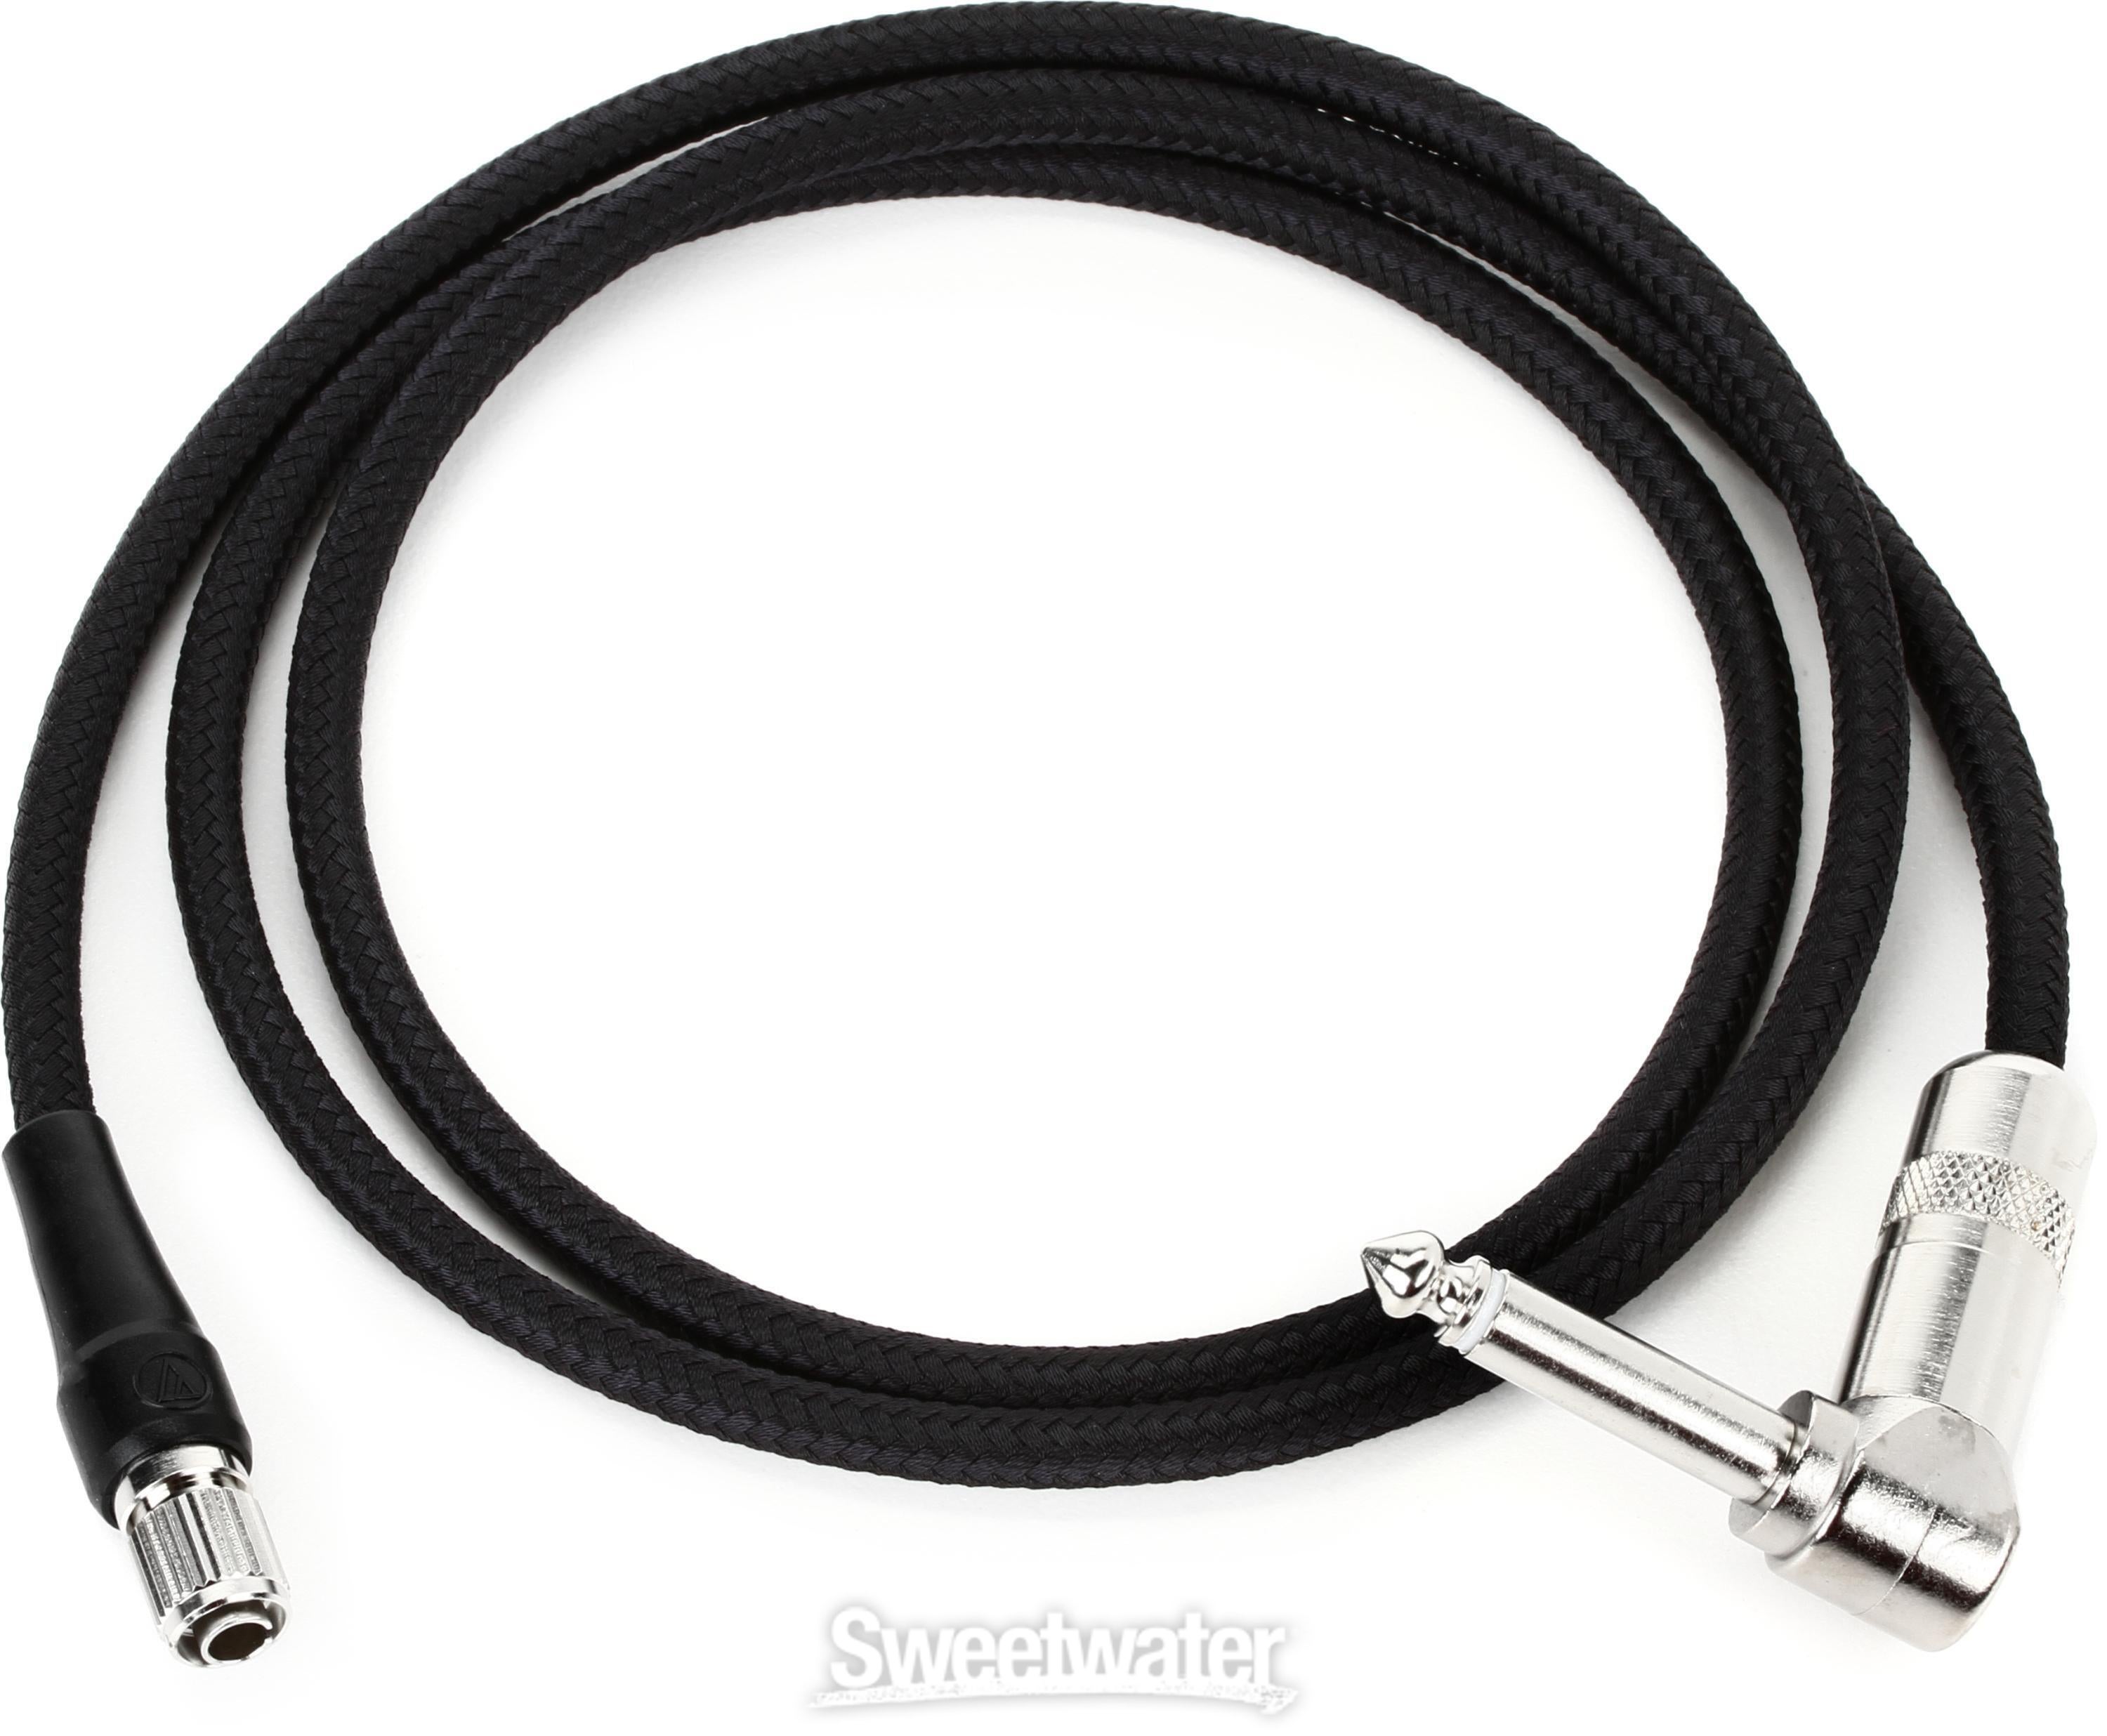 Audio-Technica AT-GRcH PRO Pro Guitar Cable for Wireless Bodypack